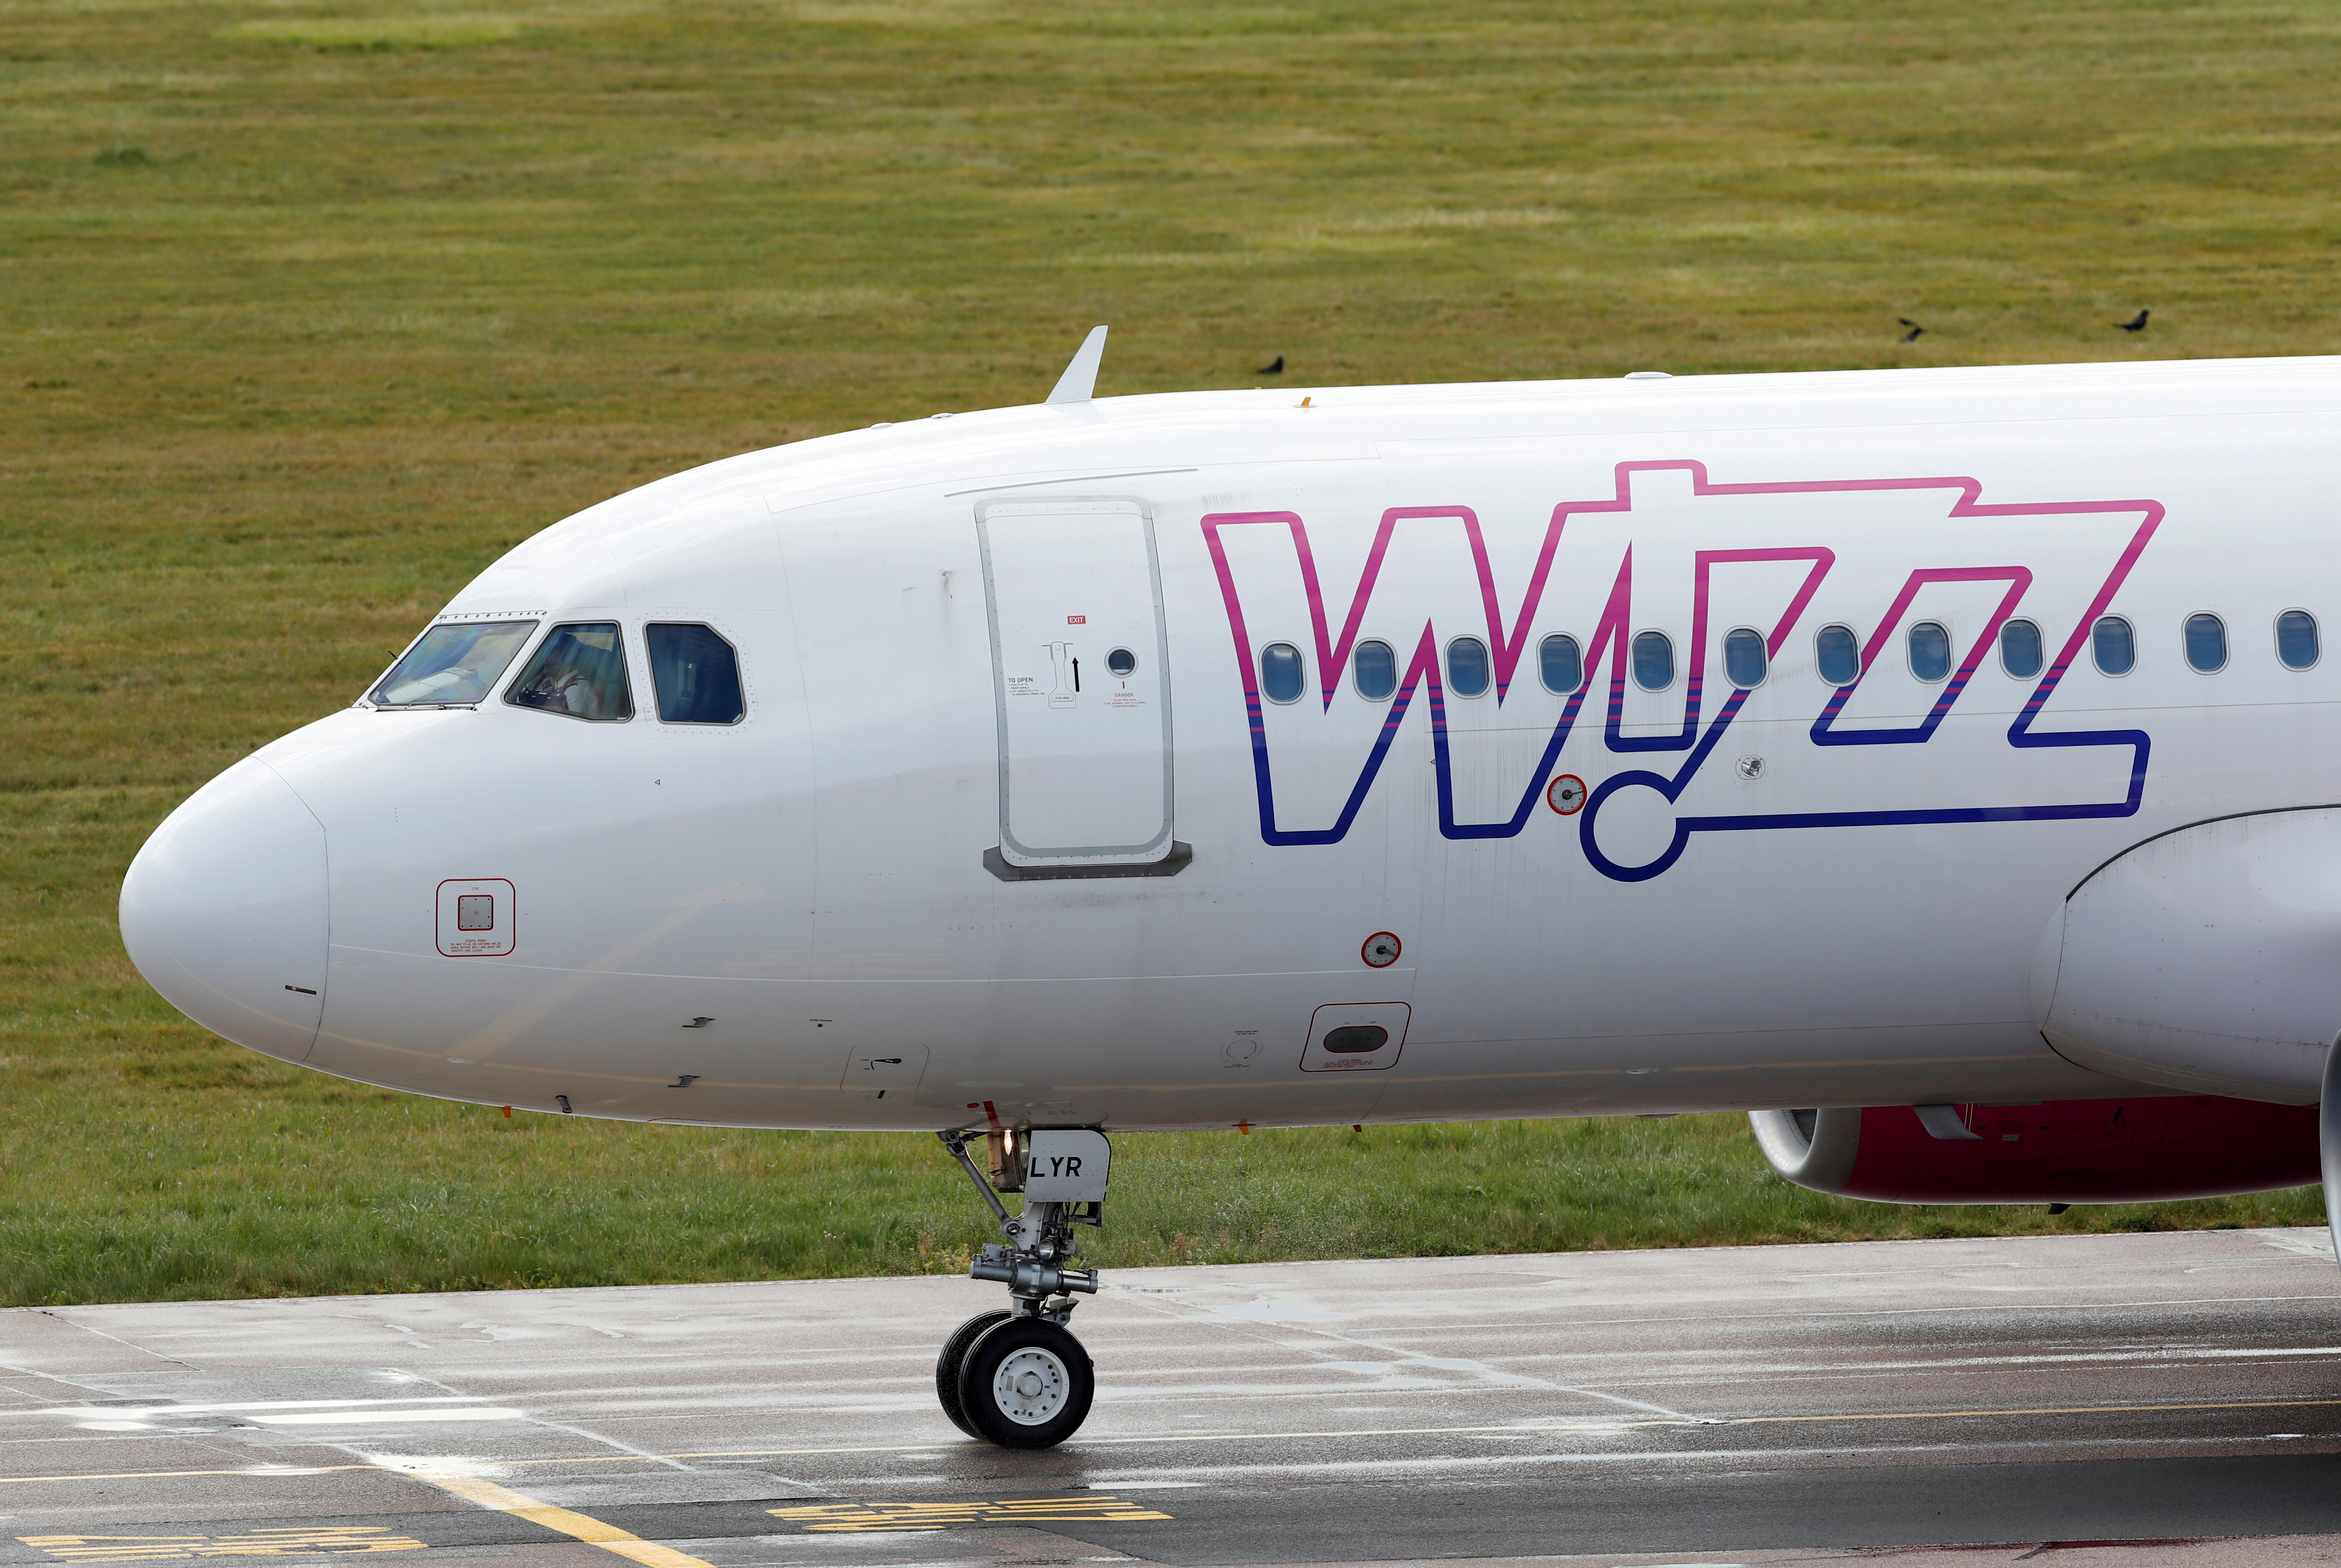 A Wizz Air Airbus A320 at Luton Airport,  Luton, Britain, May 1, 2020. REUTERS/Andrew Boyers